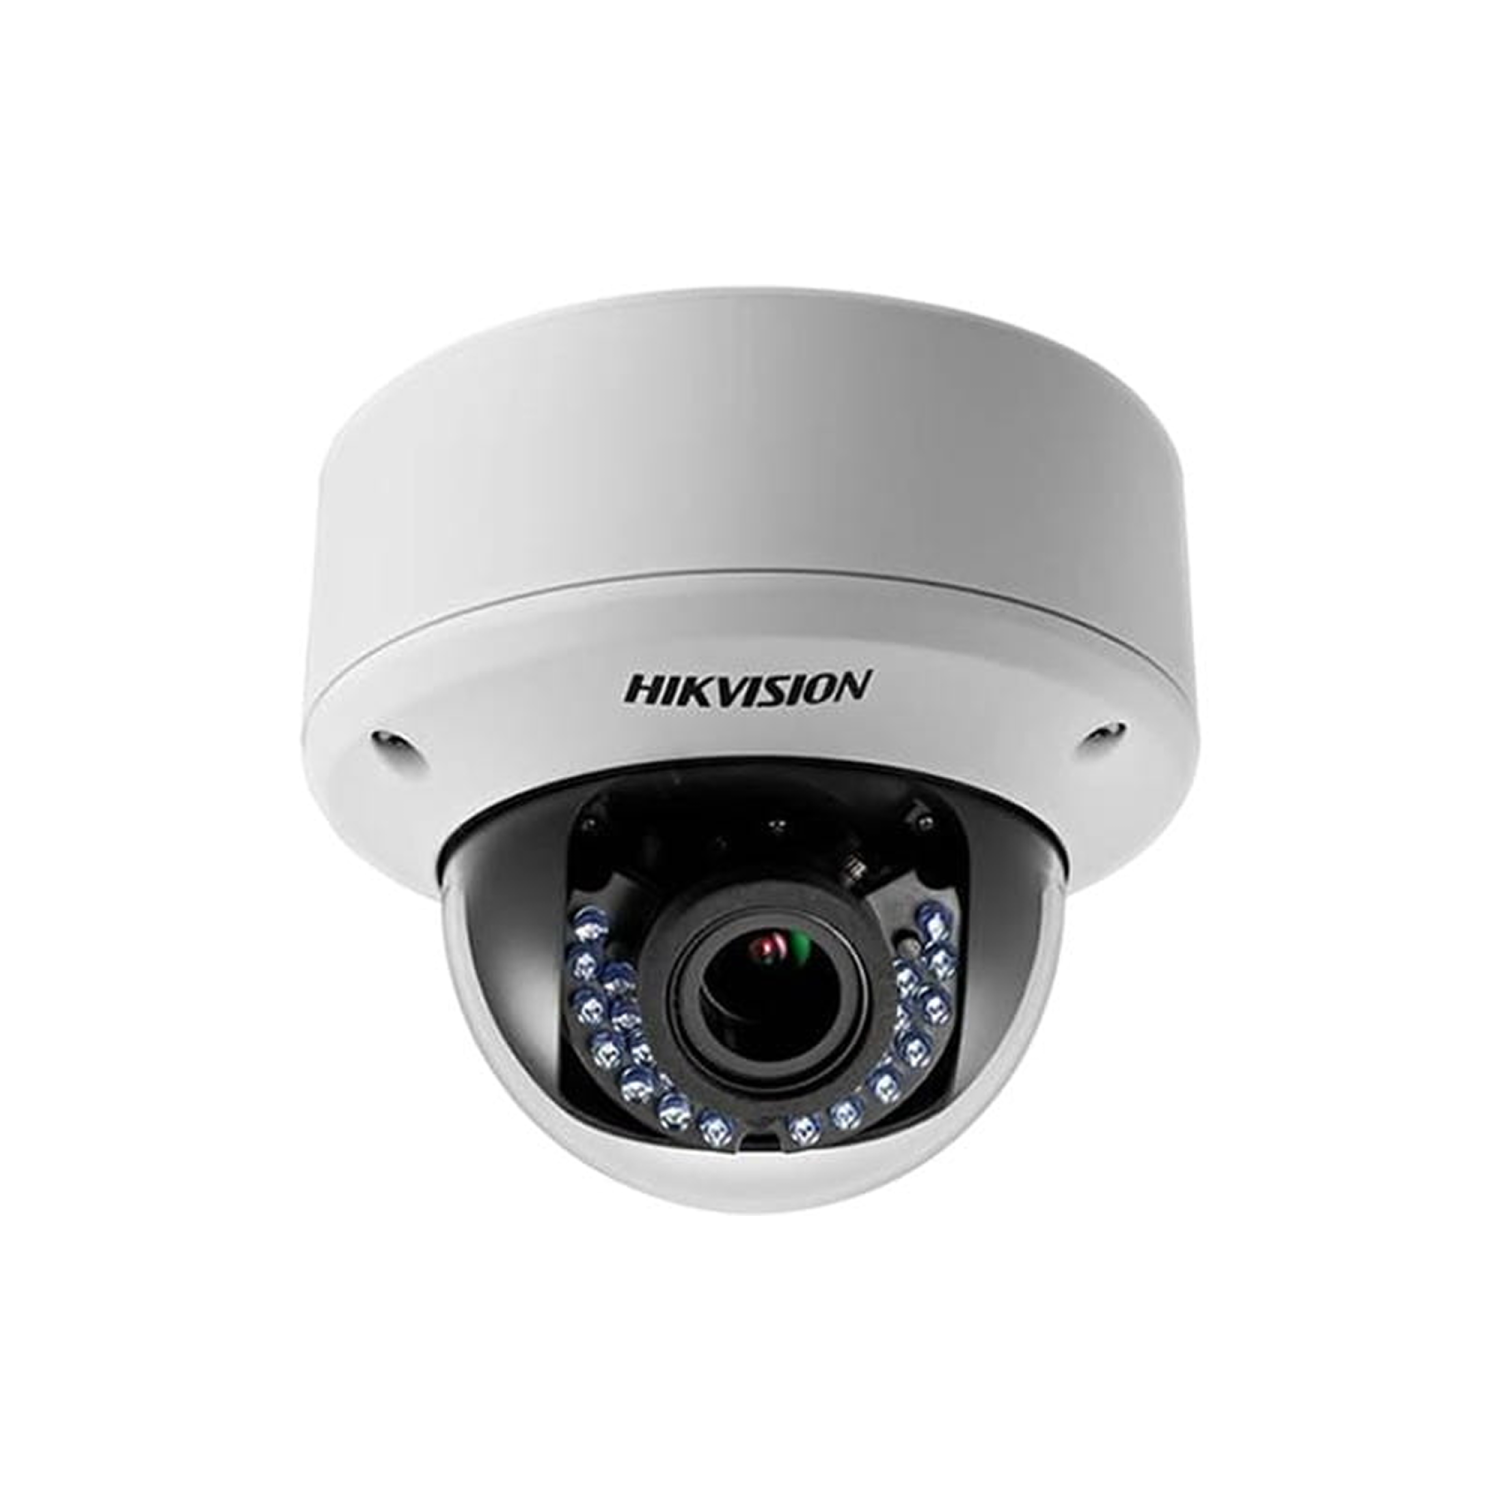 Hikvision Turbo Hd1080p Vandal Proof Ir Dome Camera 2 8mm 4mm Ds 2ce56d1t Vpir Best Computers